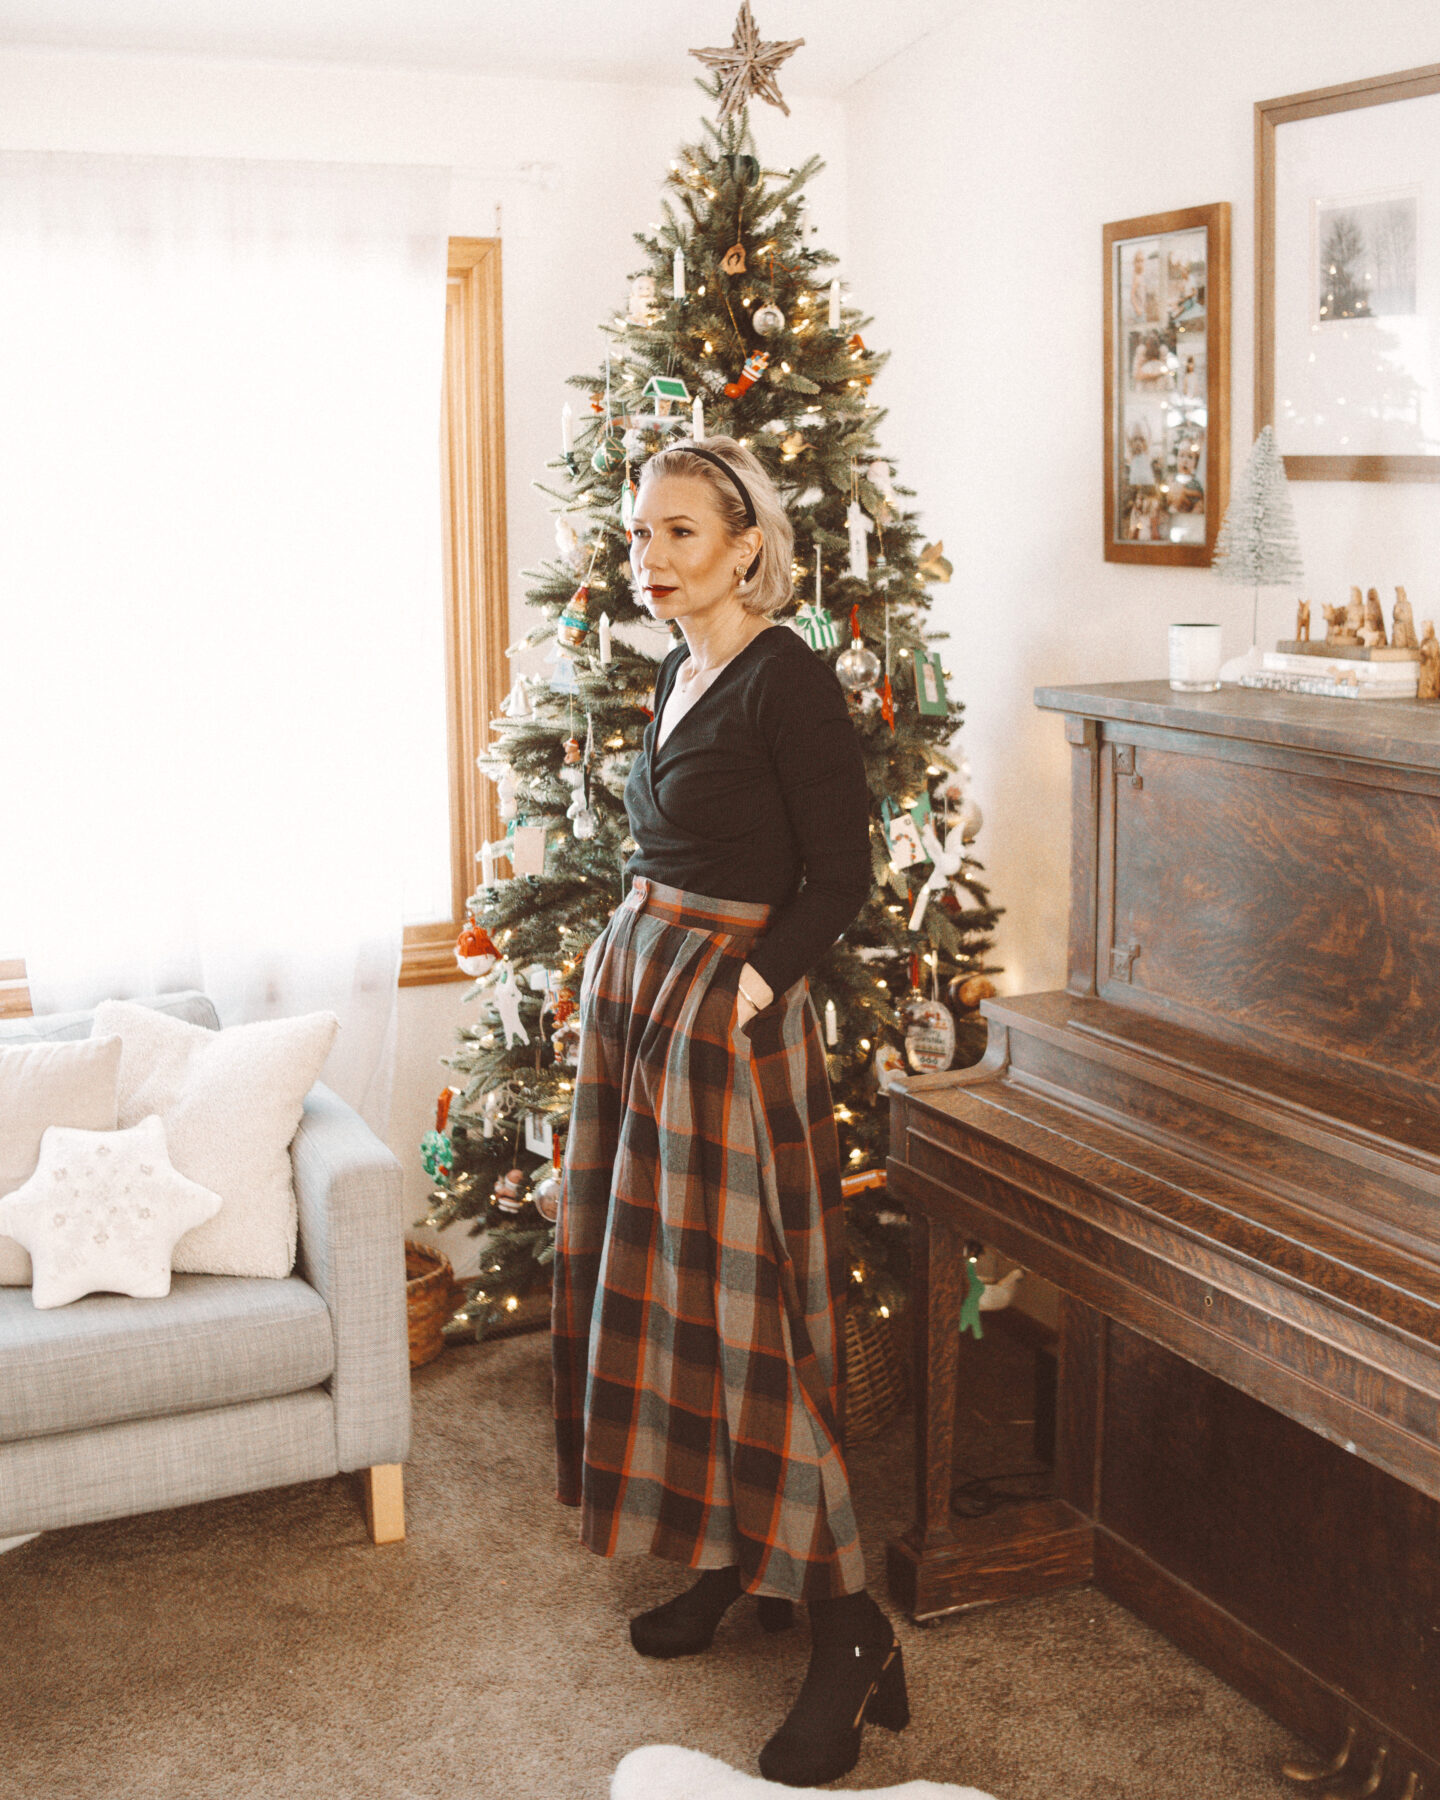 Karin Emily wears a holiday party outfit with a black wrap top, plaid maxi skirt, and black platform heels in front of her Christmas tree